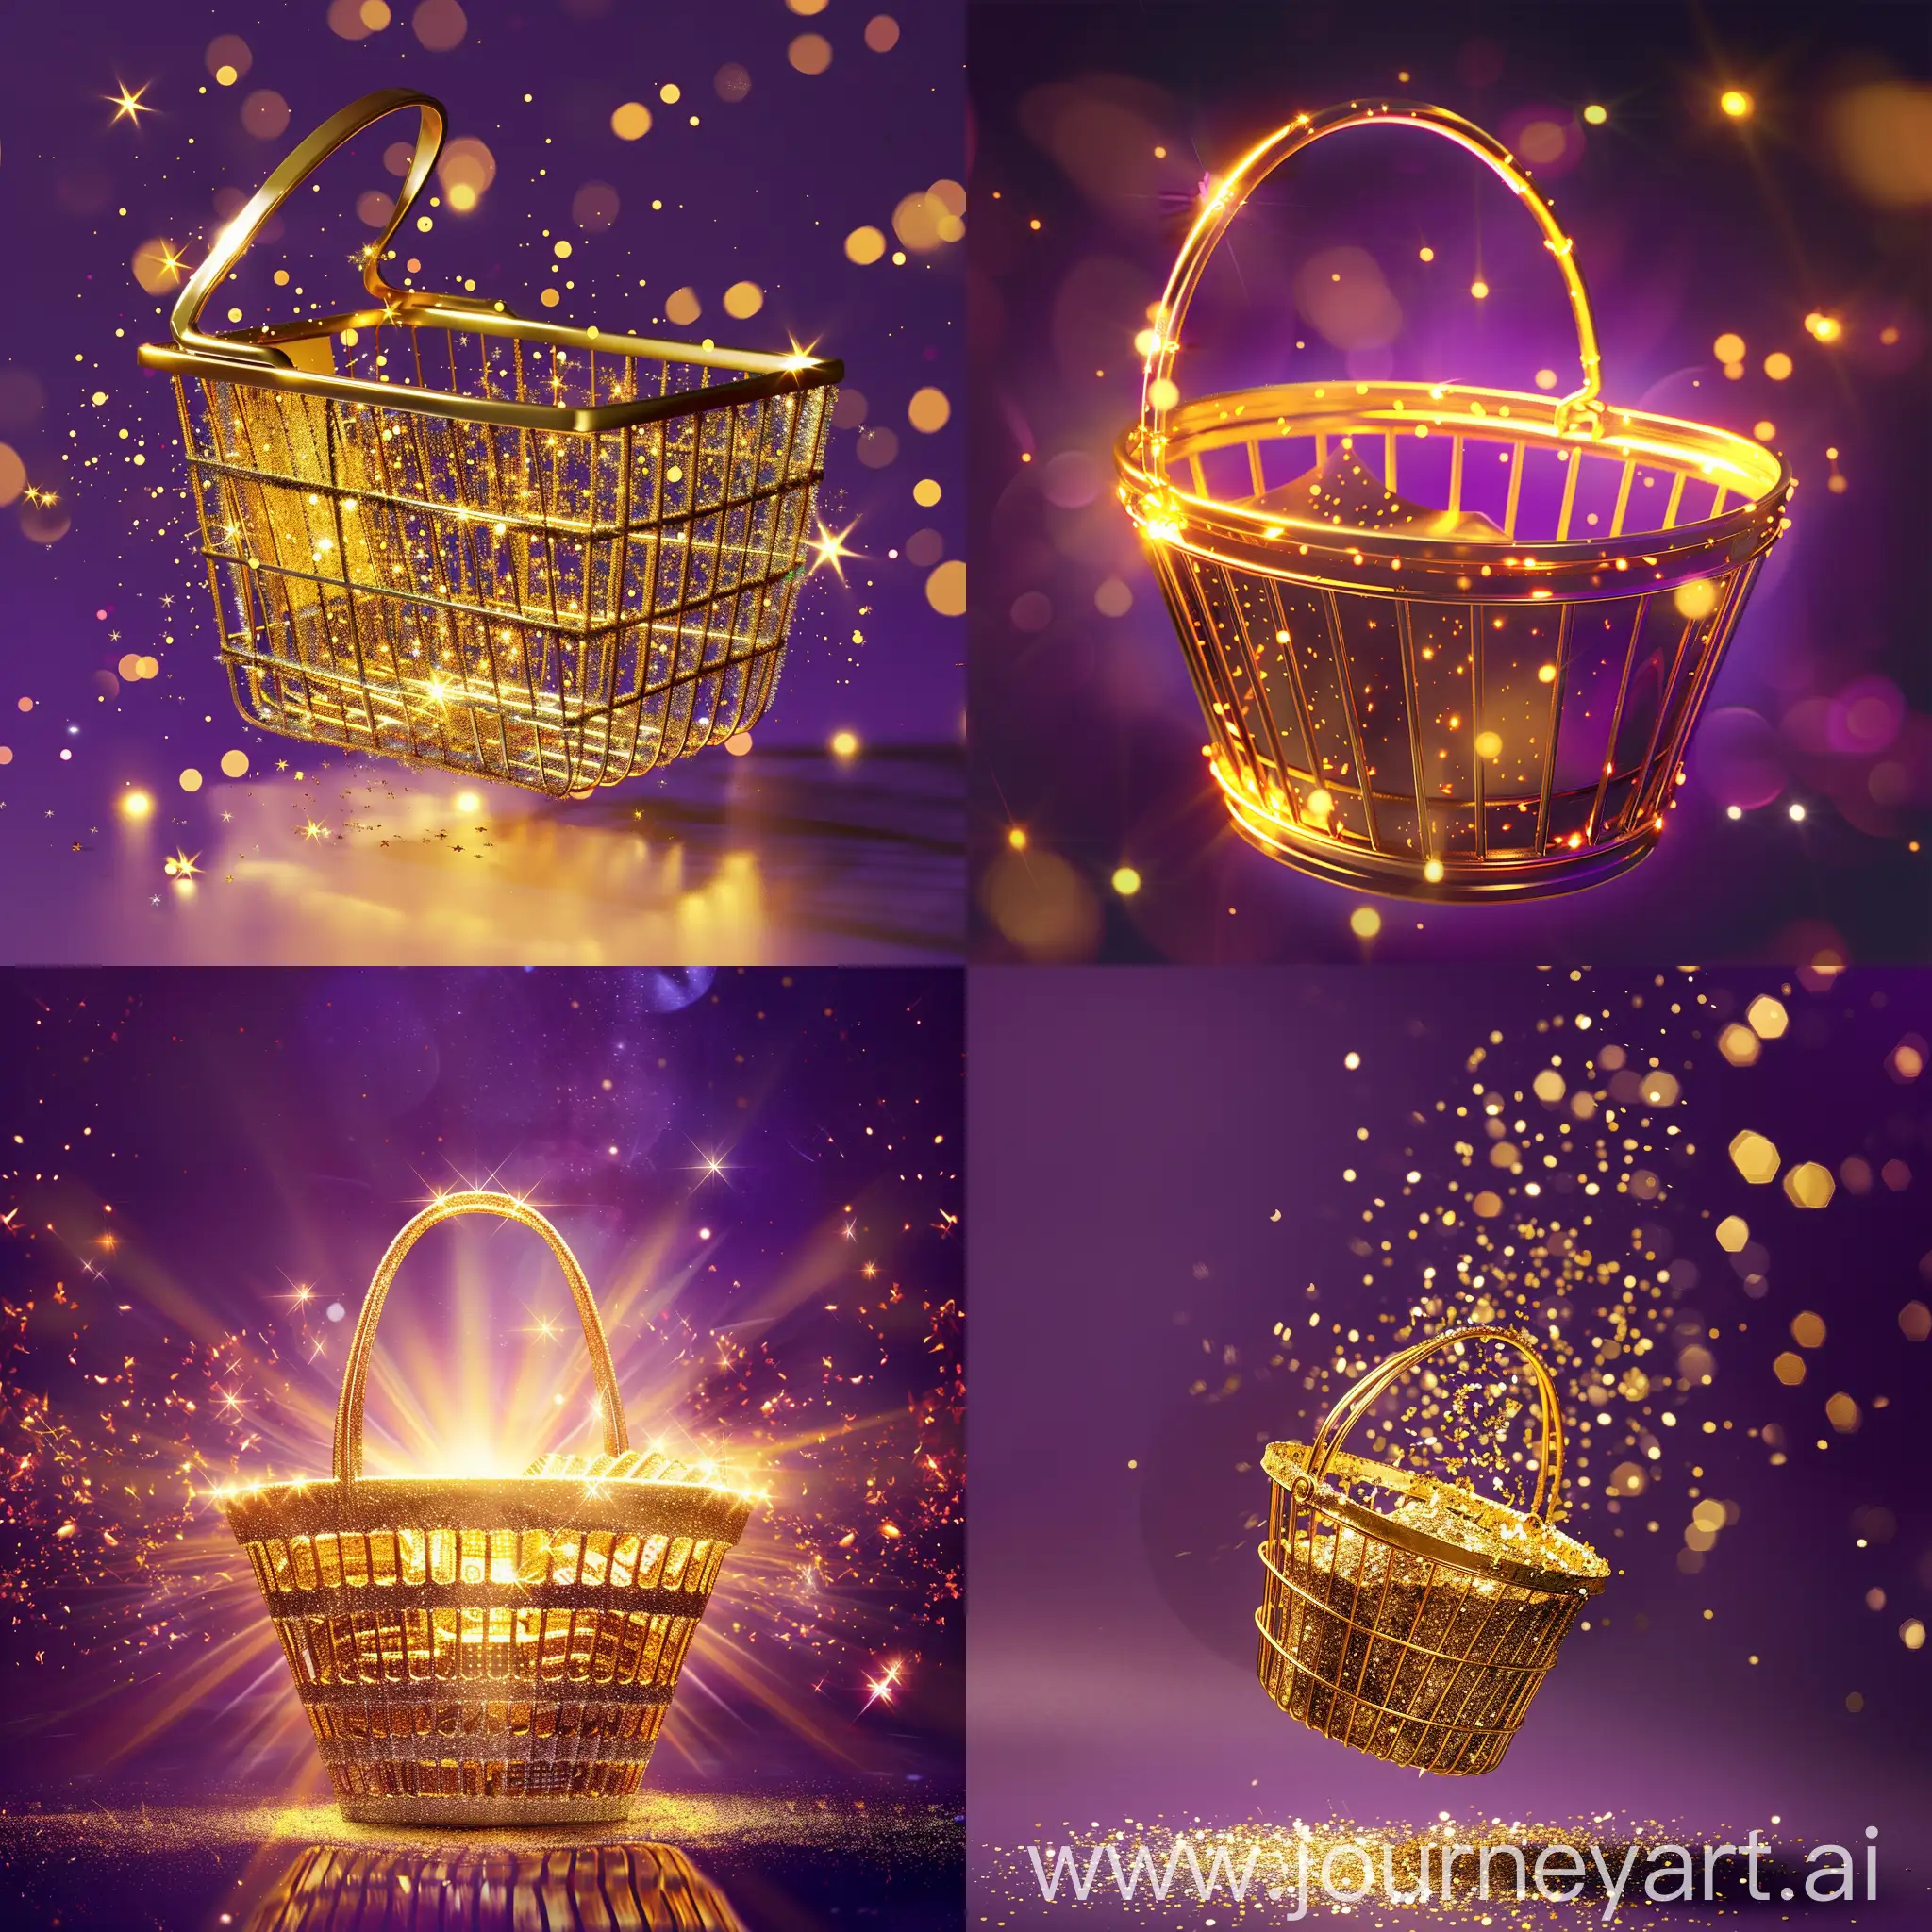 Golden-Shopping-Basket-on-Purple-Background-Surrounded-by-Golden-Light